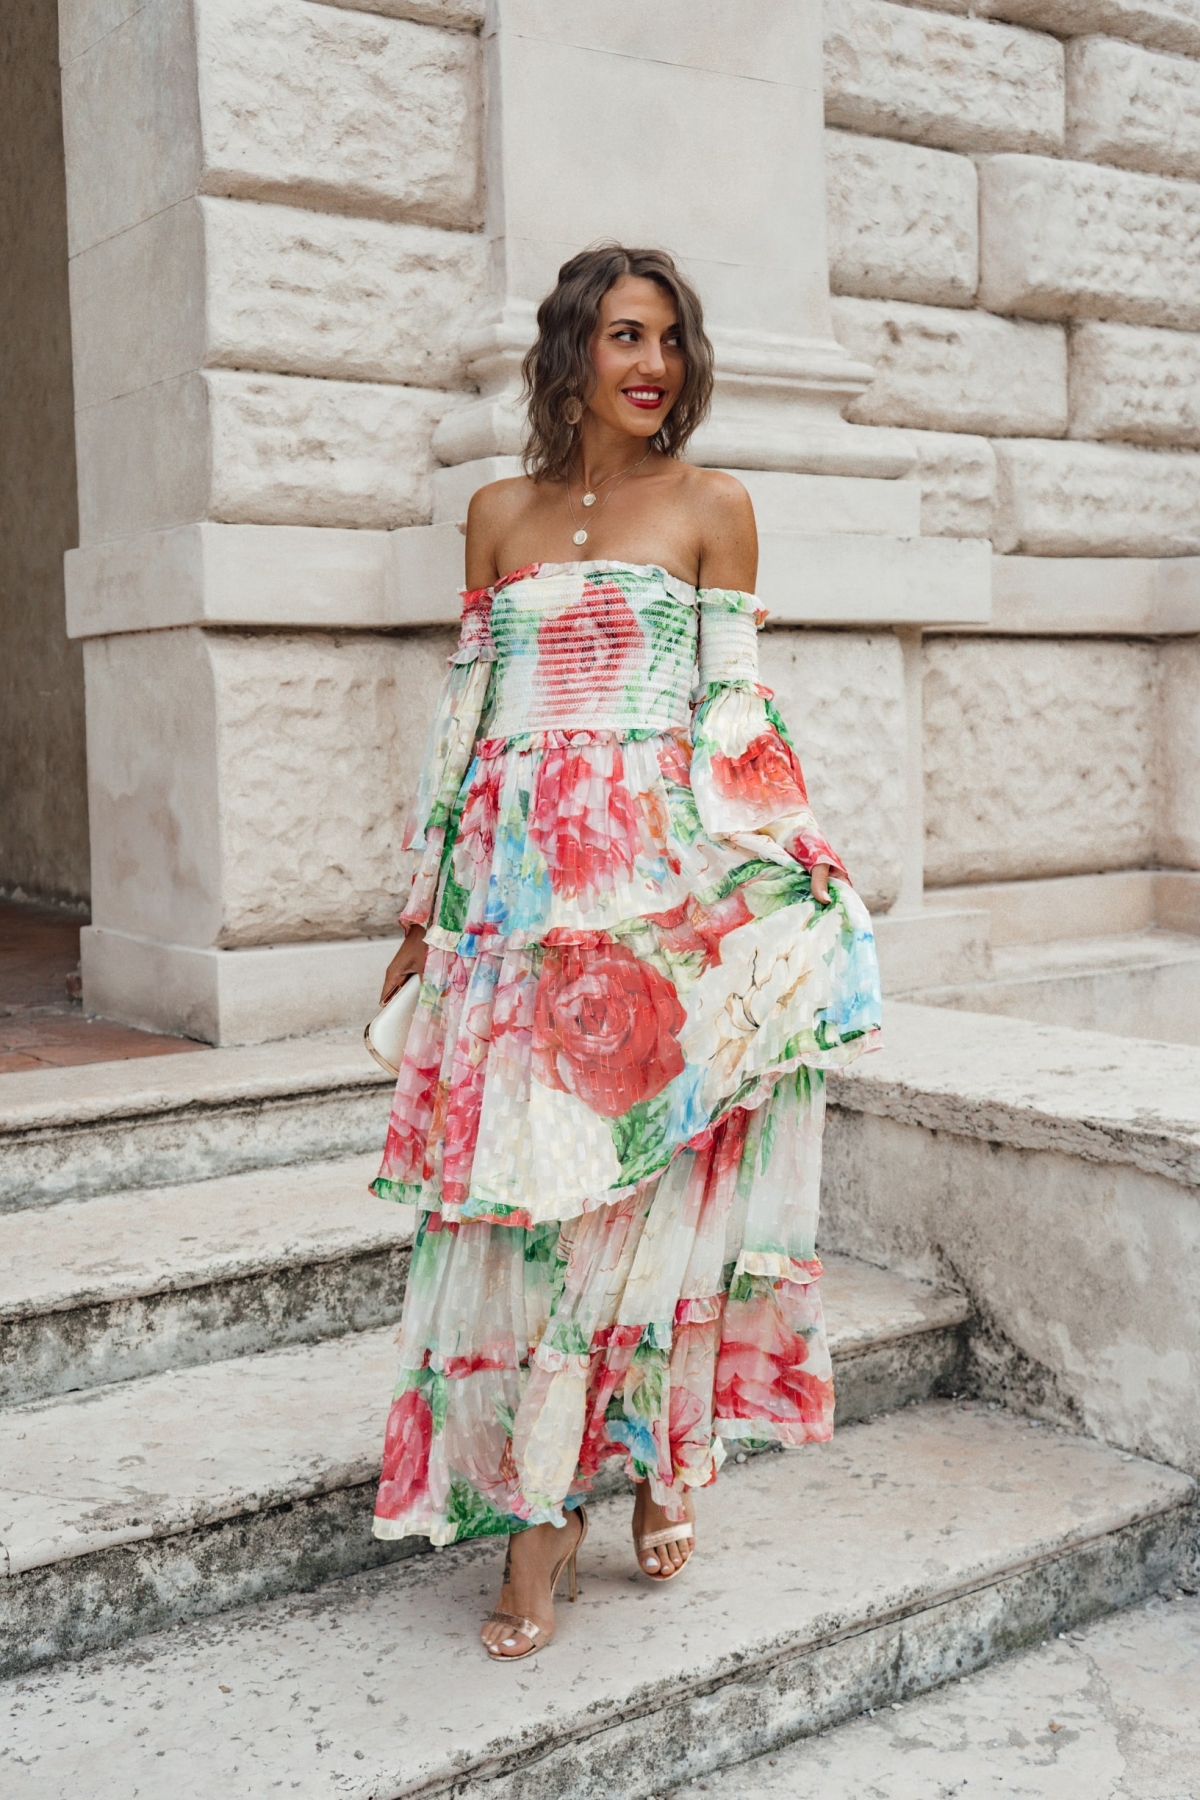 Maxi dress | Welcome to my world